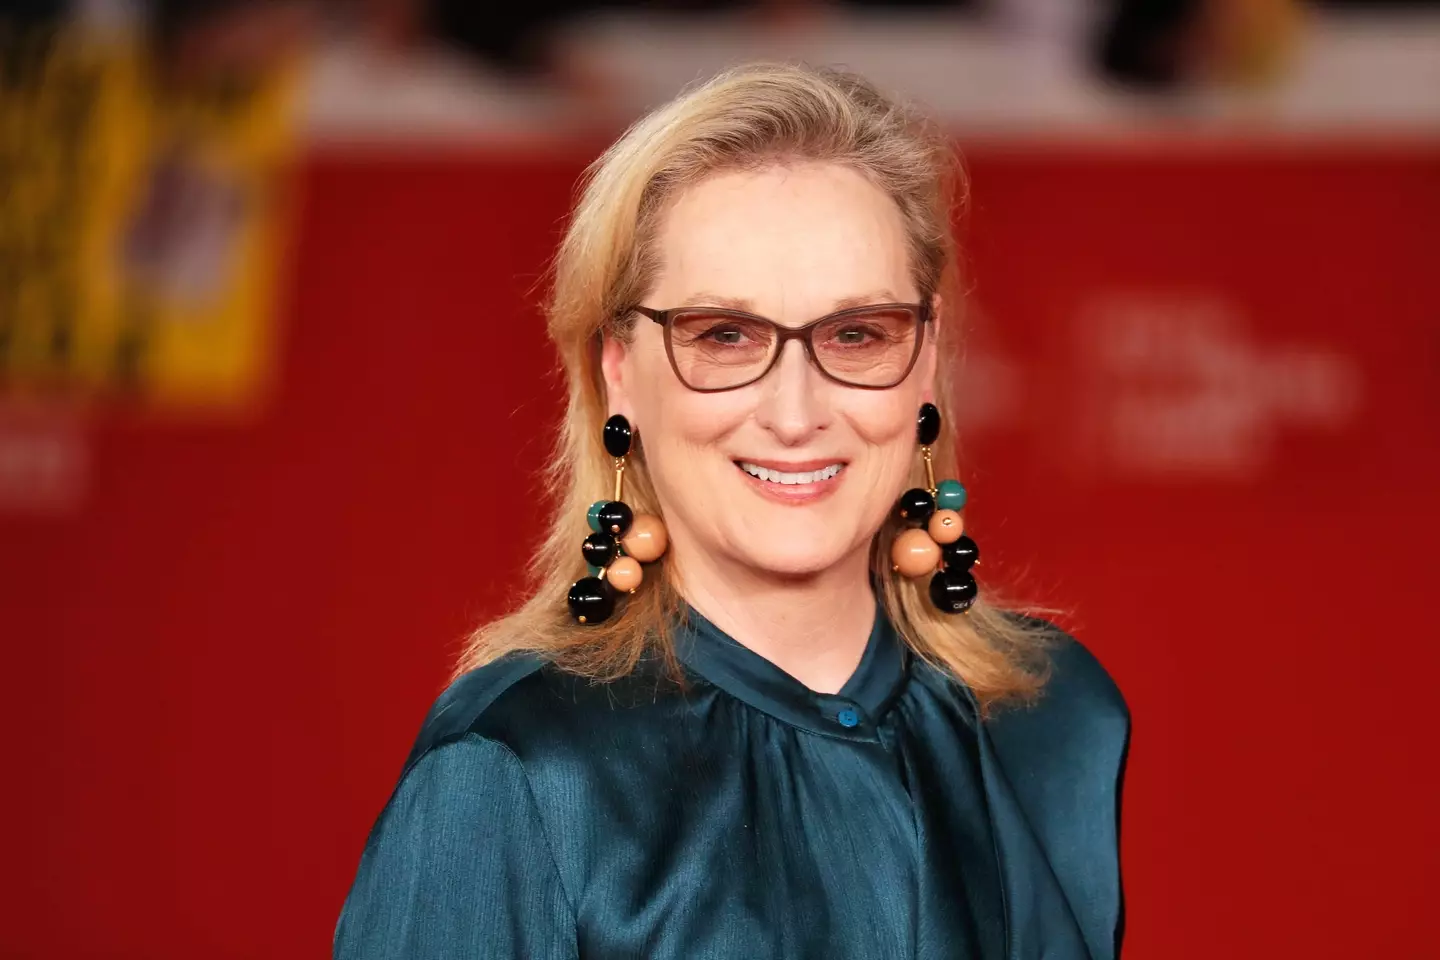 Fans think Streep could play the stern Professor Mcgonagall.